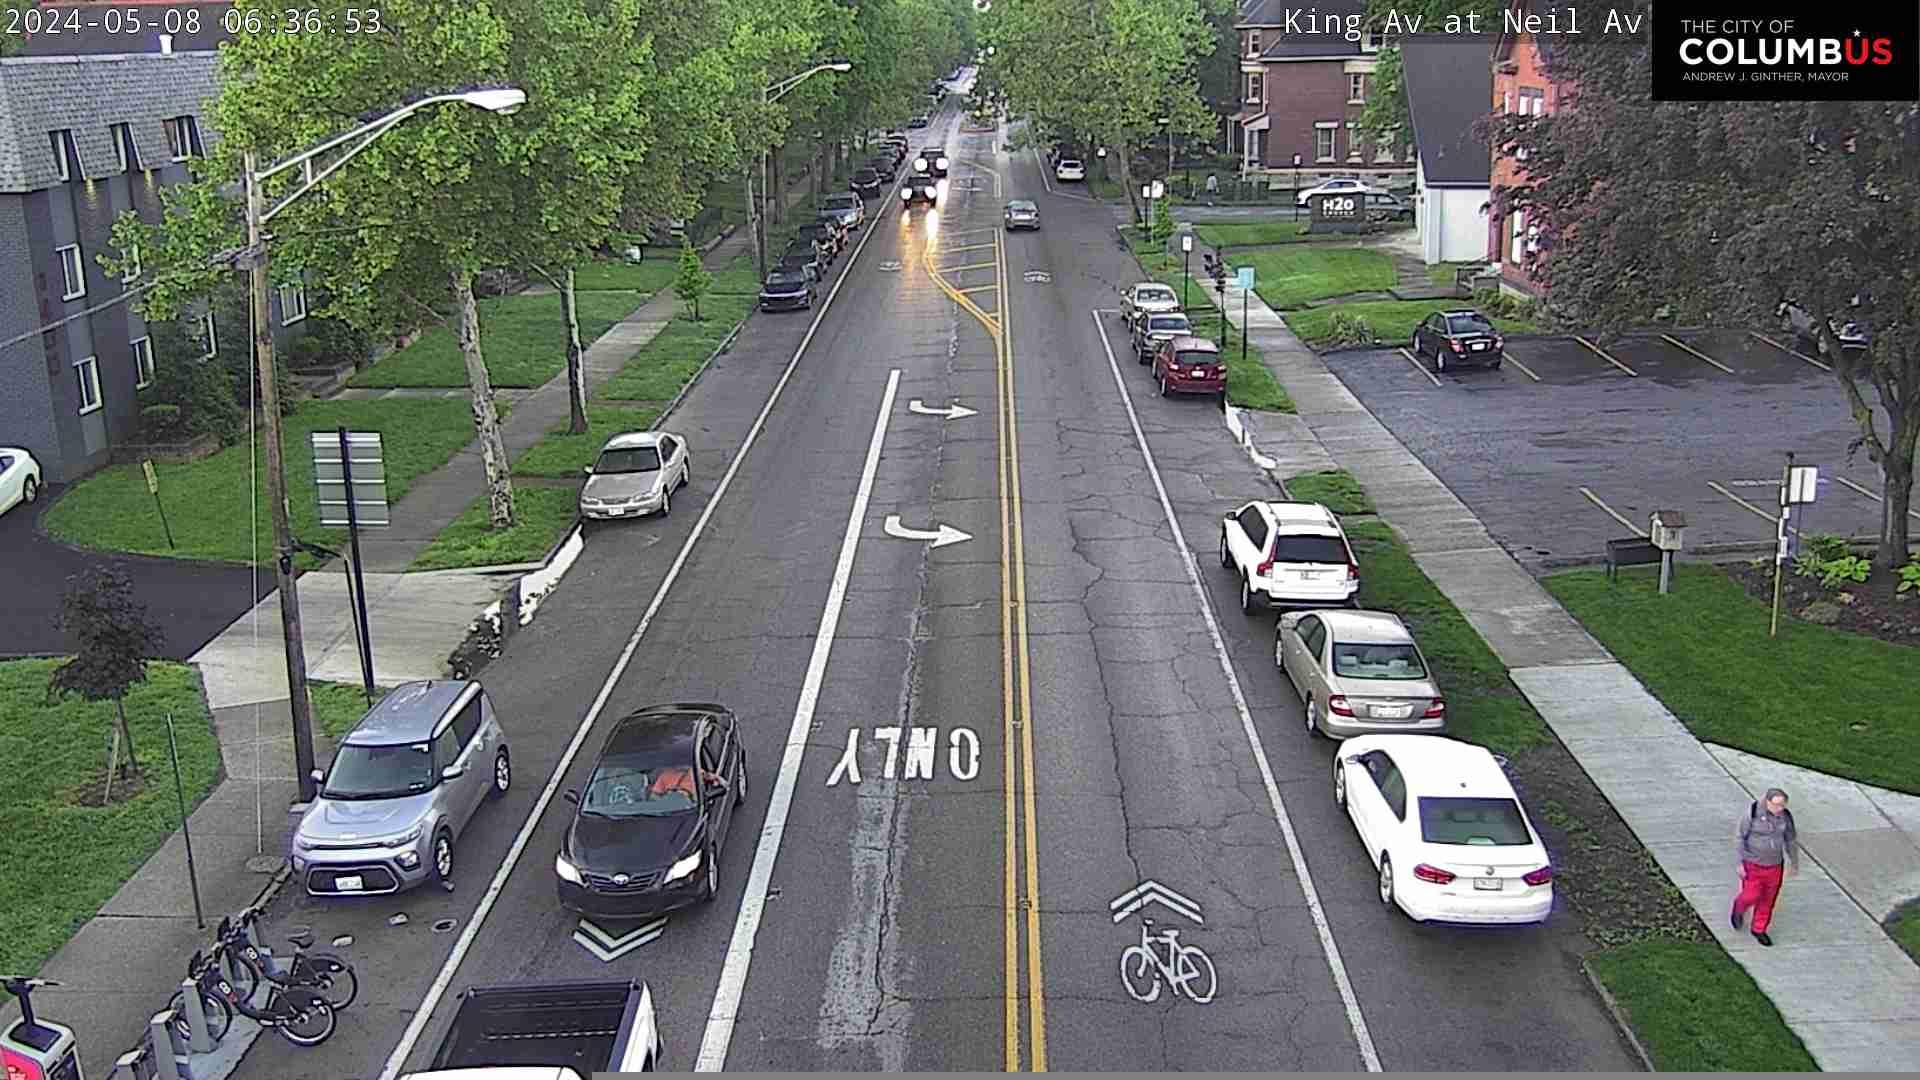 Dennison Place: City of Columbus) Neil Ave at King Ave Traffic Camera